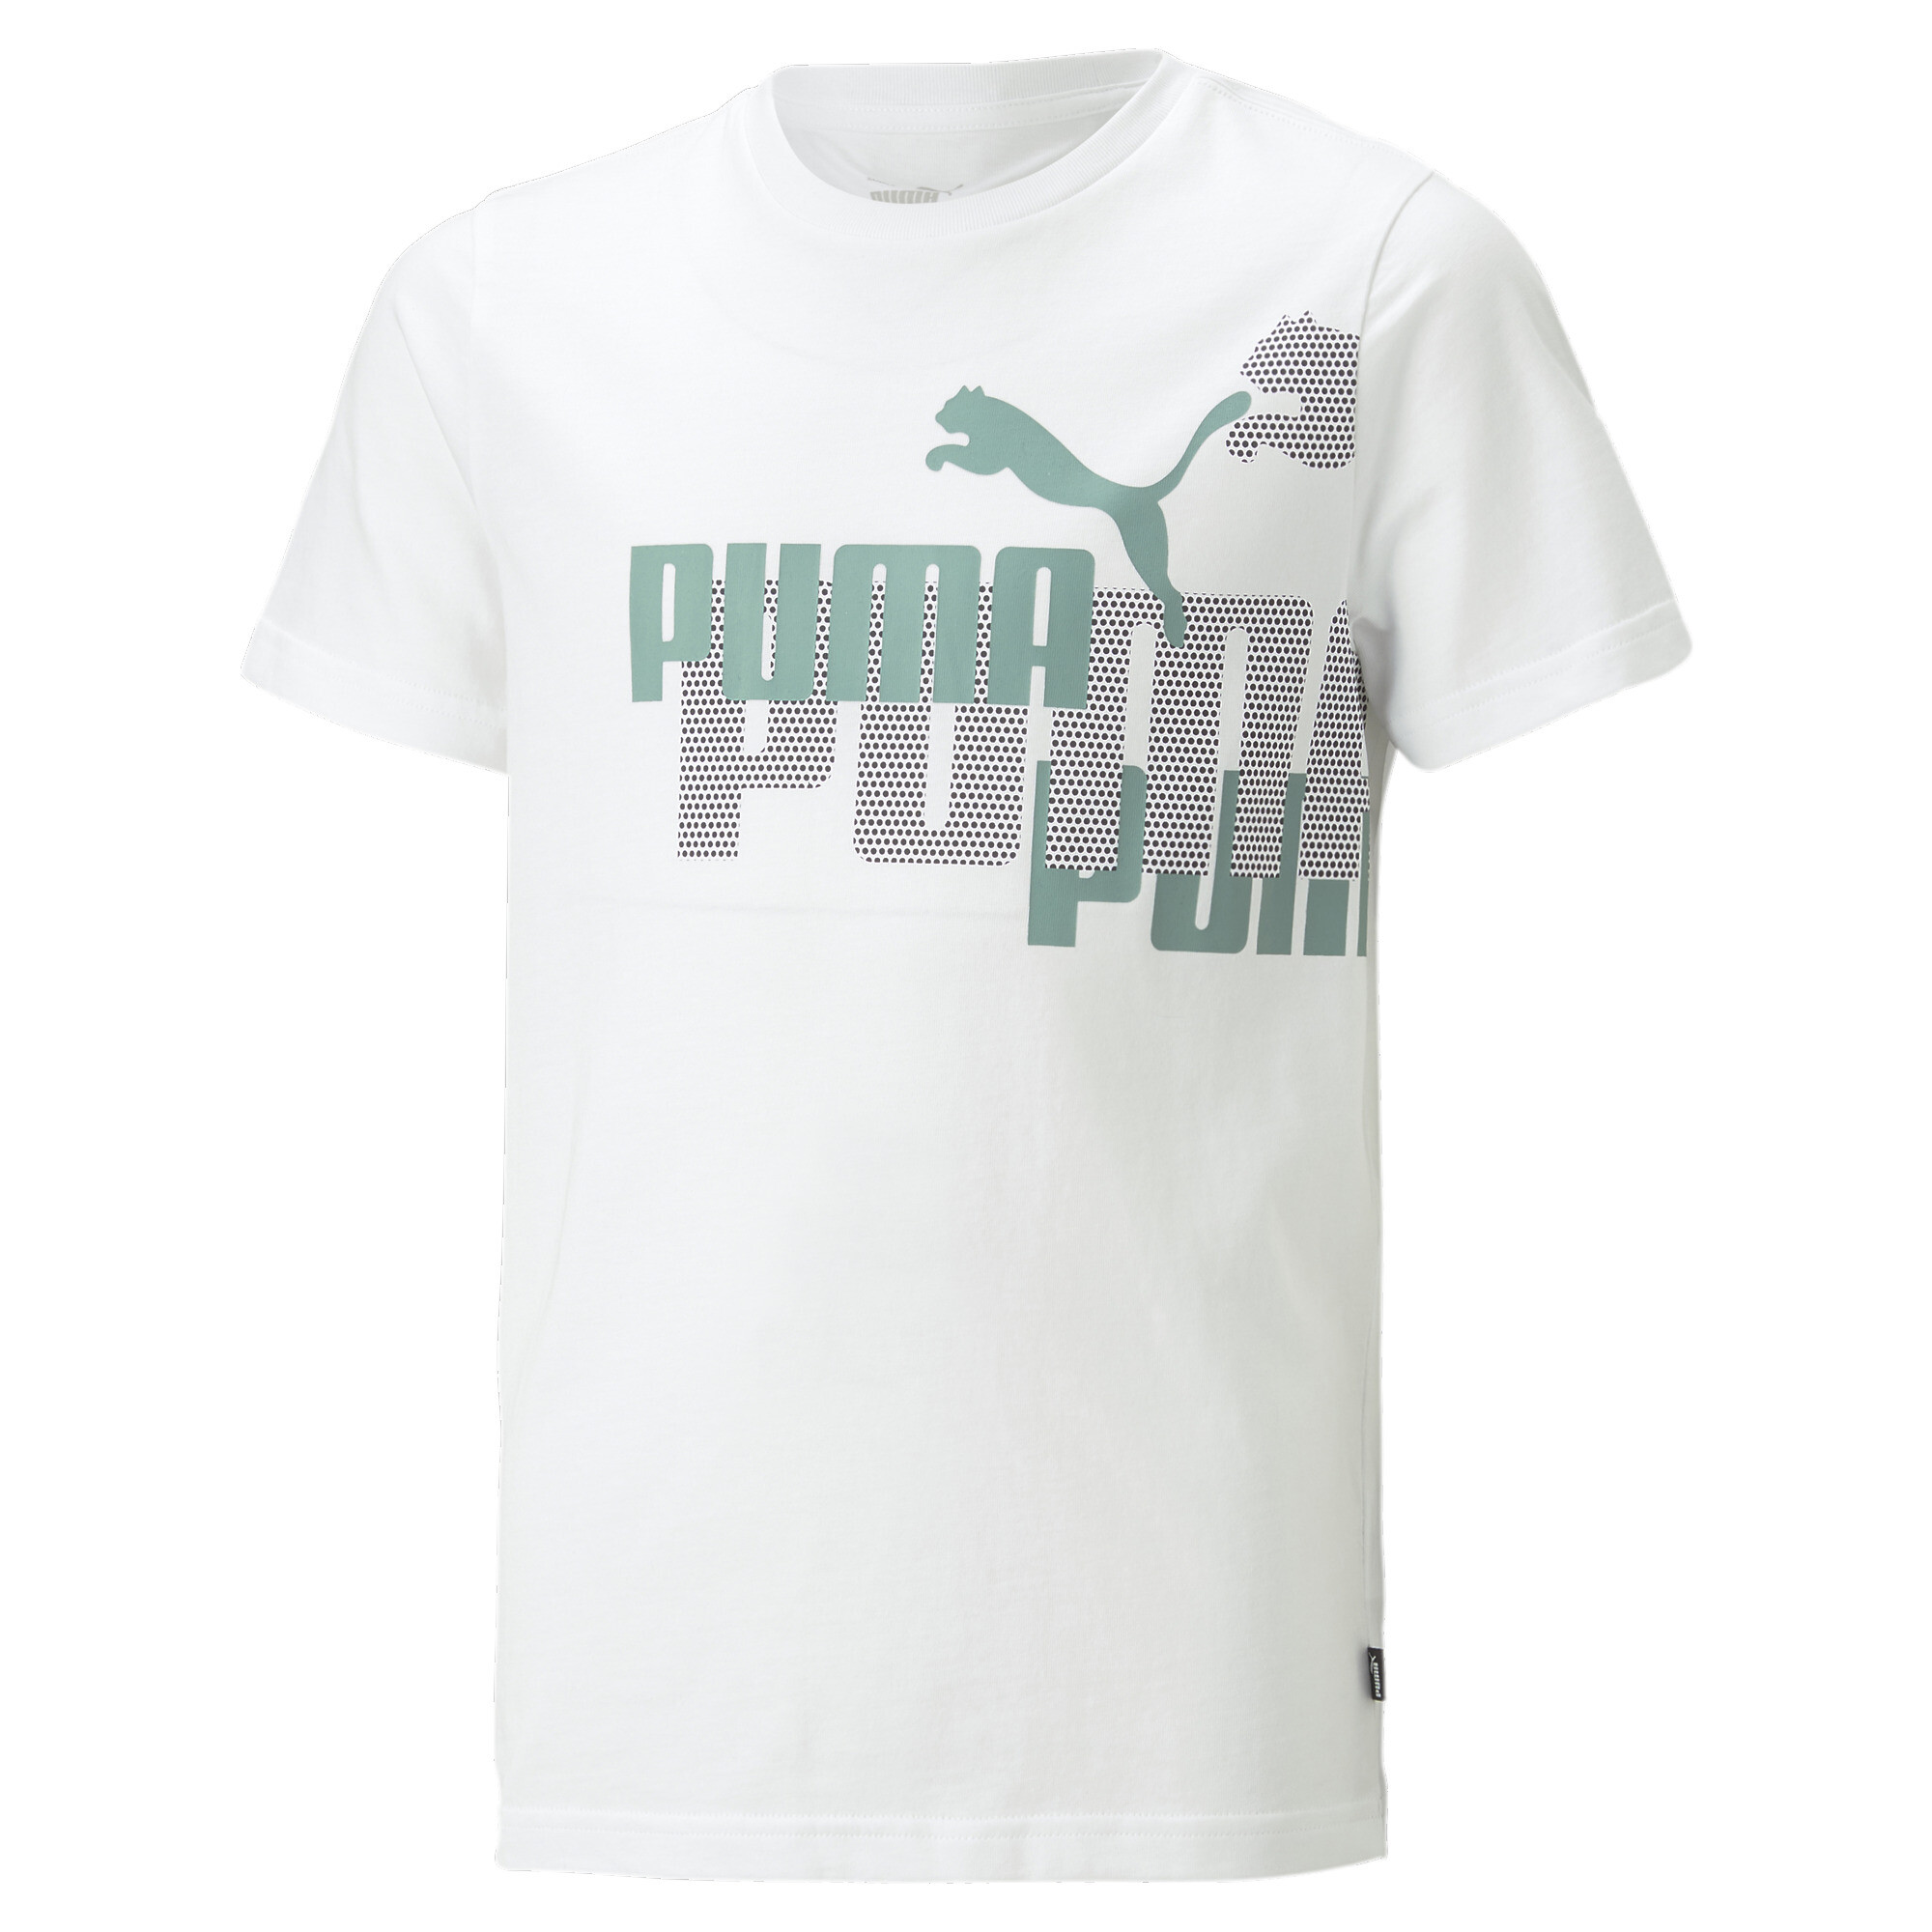 PUMA ESS+ LOGO POWER T-Shirt In White, Size 9-10 Youth